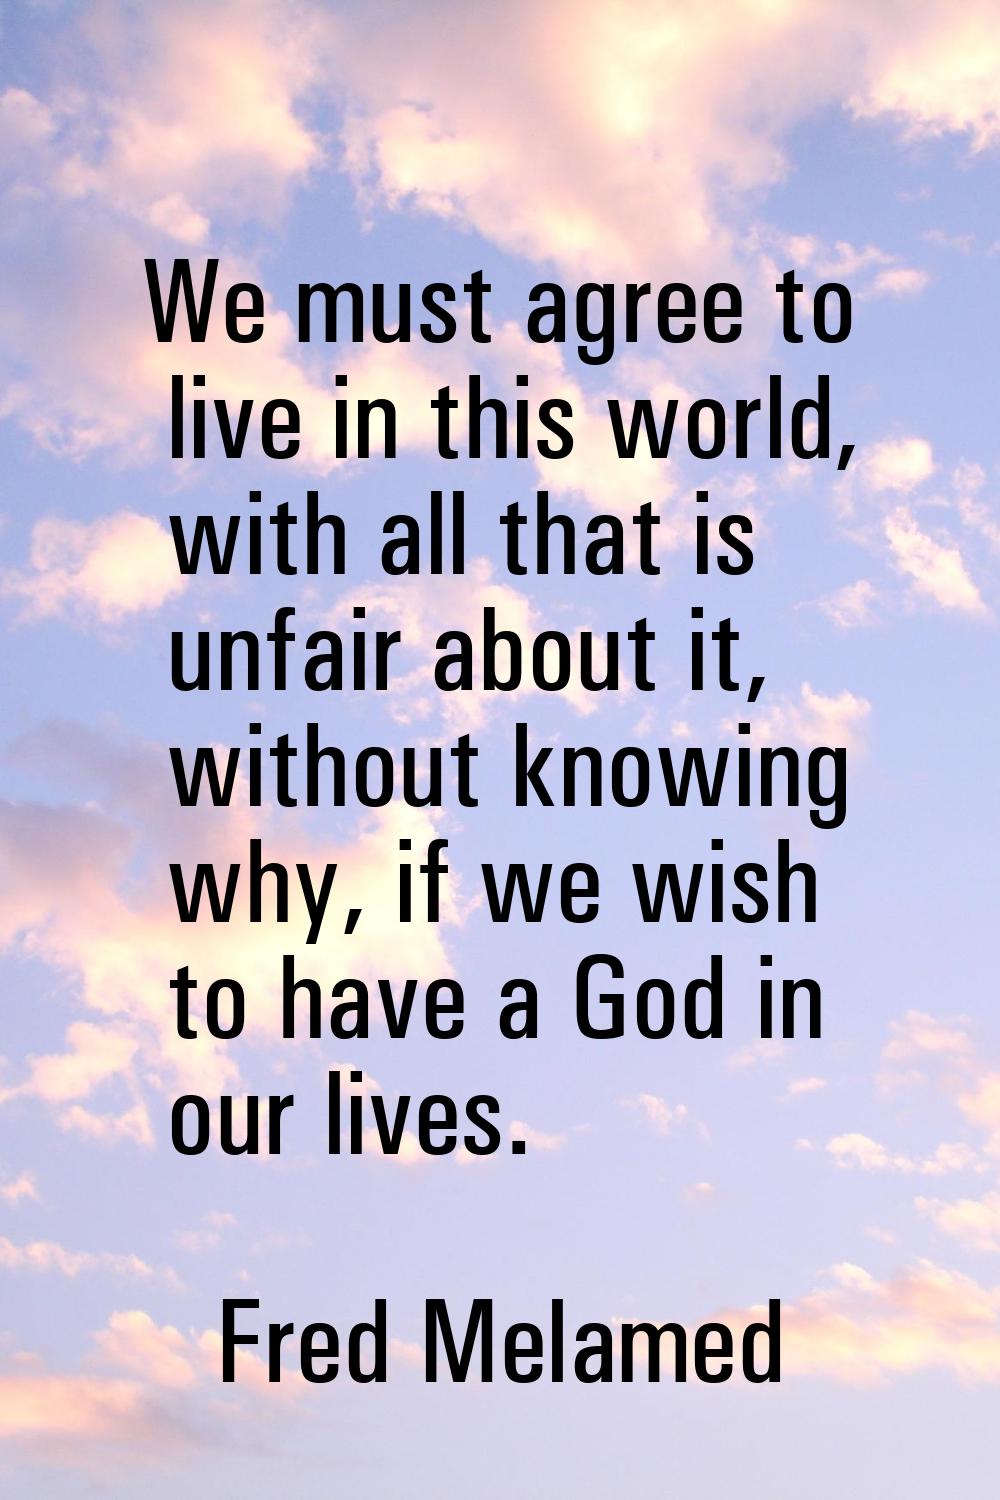 We must agree to live in this world, with all that is unfair about it, without knowing why, if we w